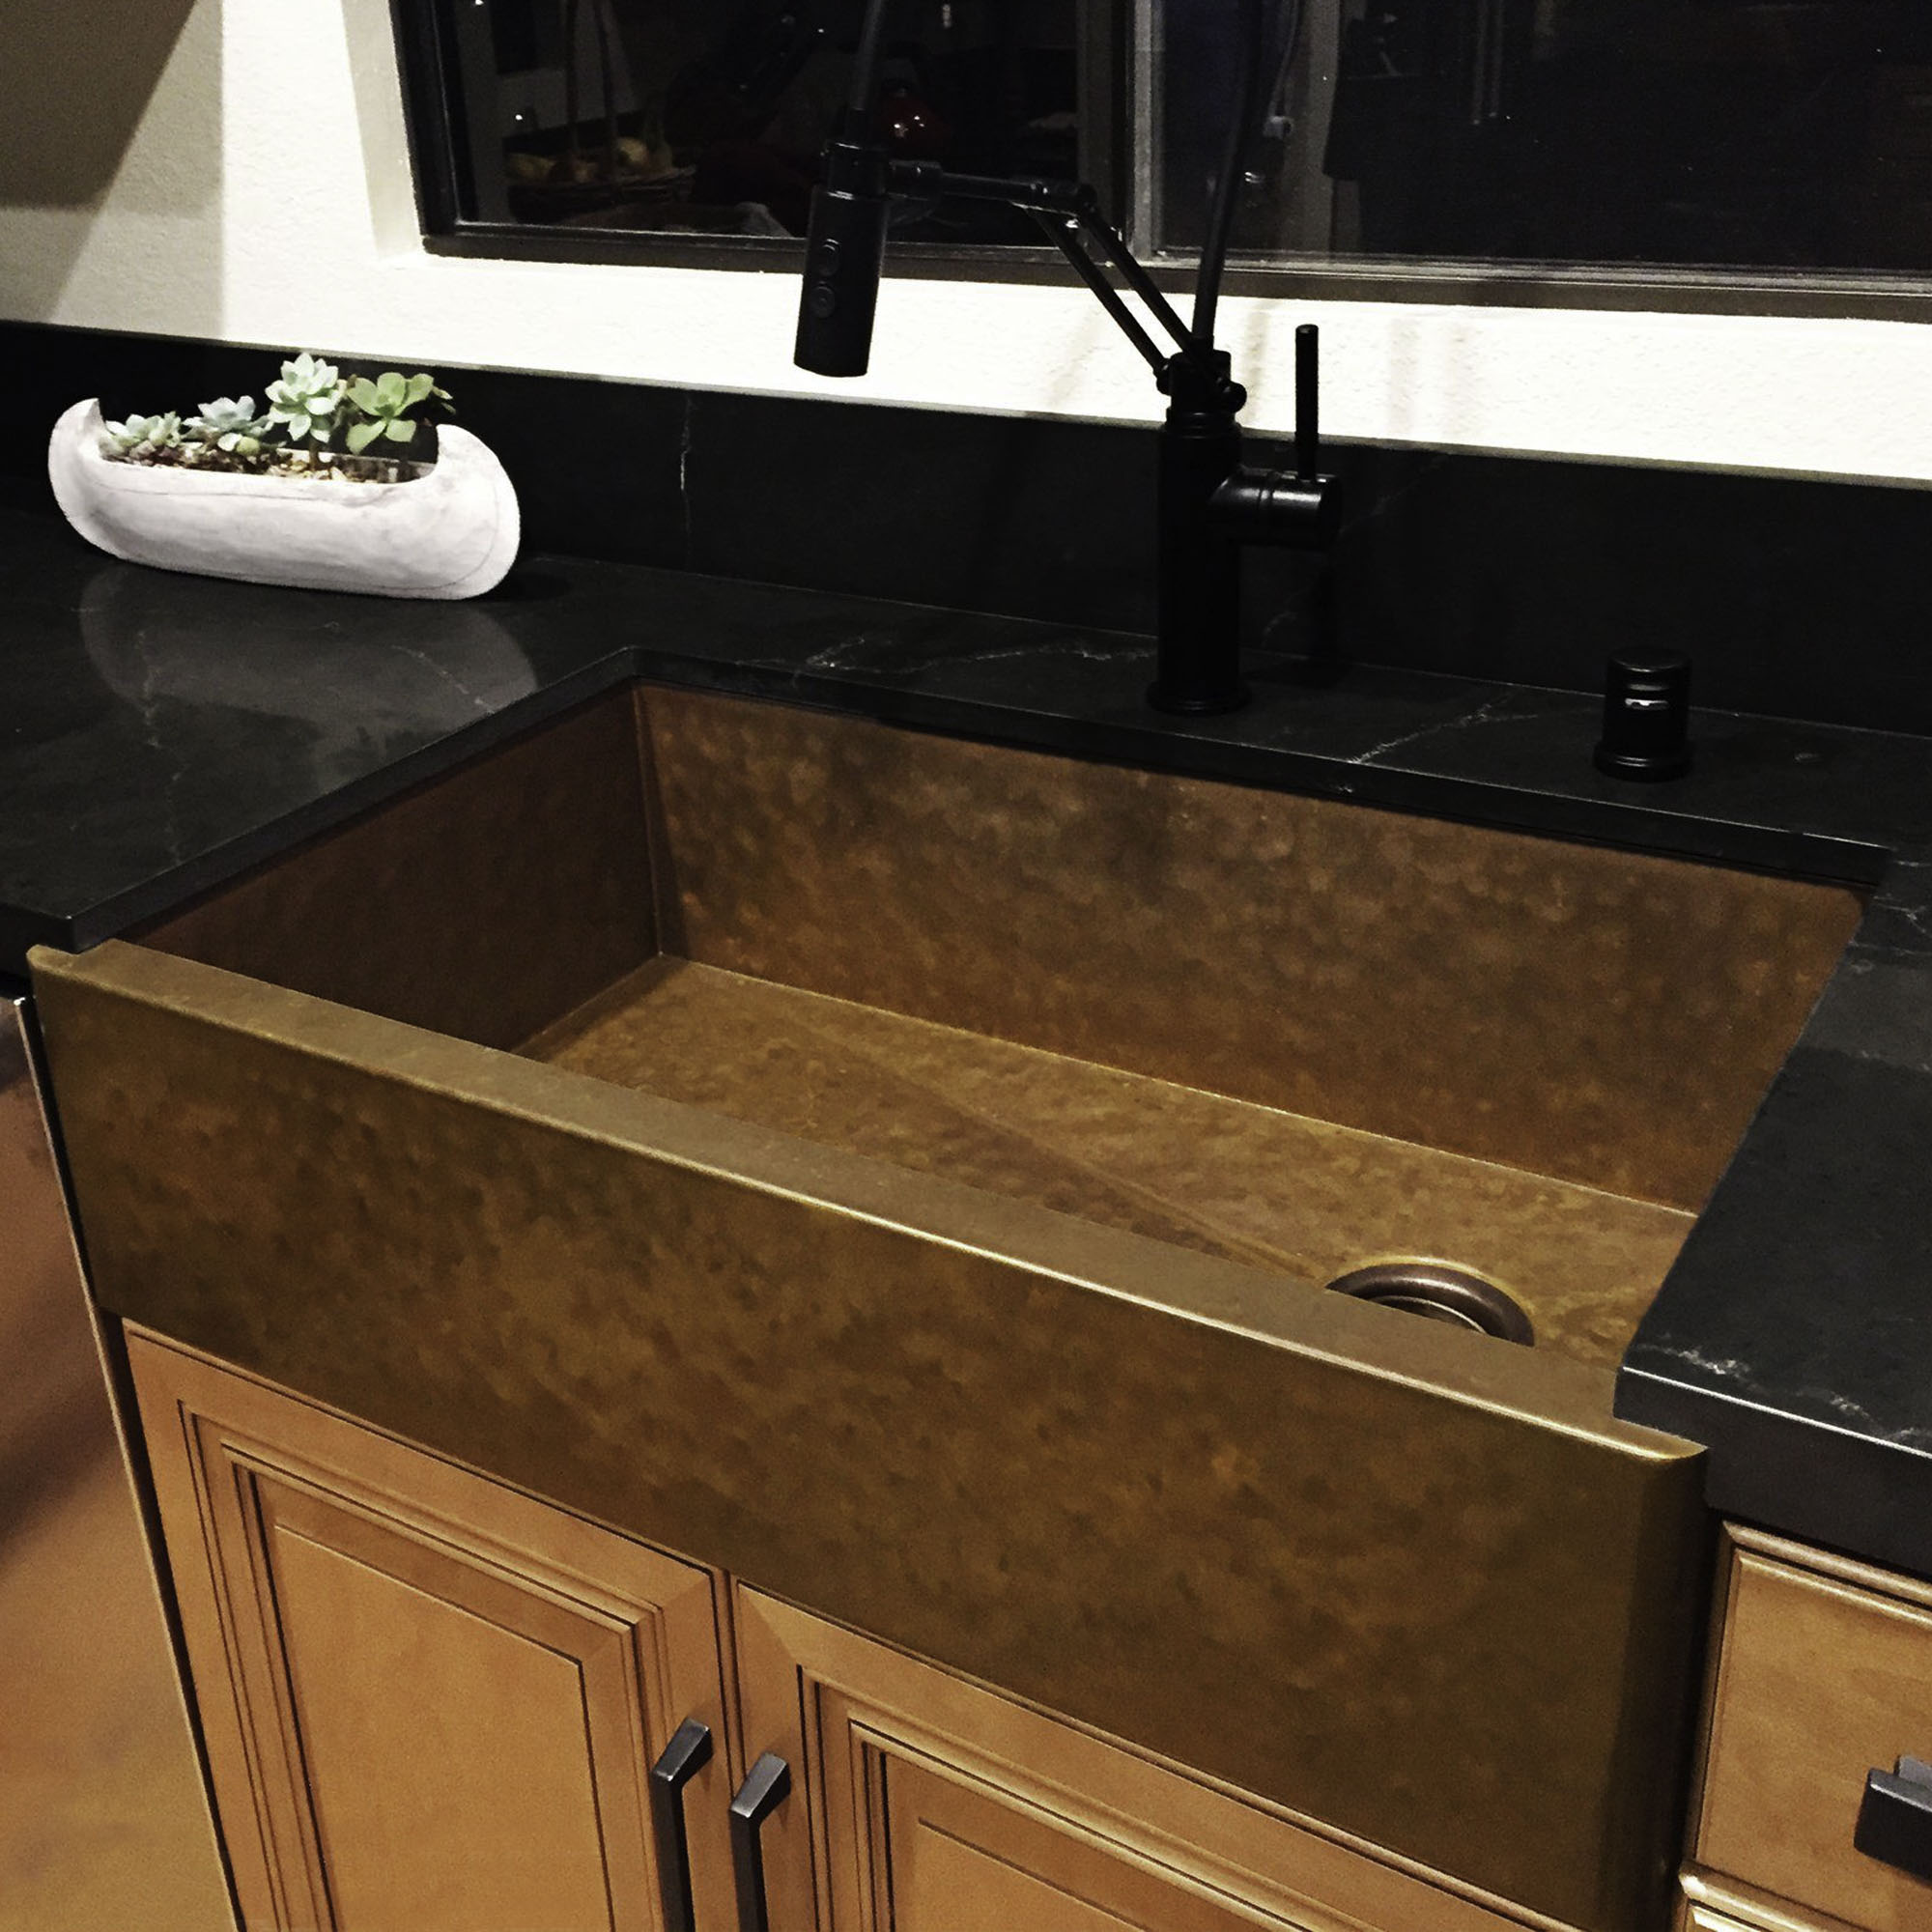 Heritage Farmhouse Sink - Hammered Copper